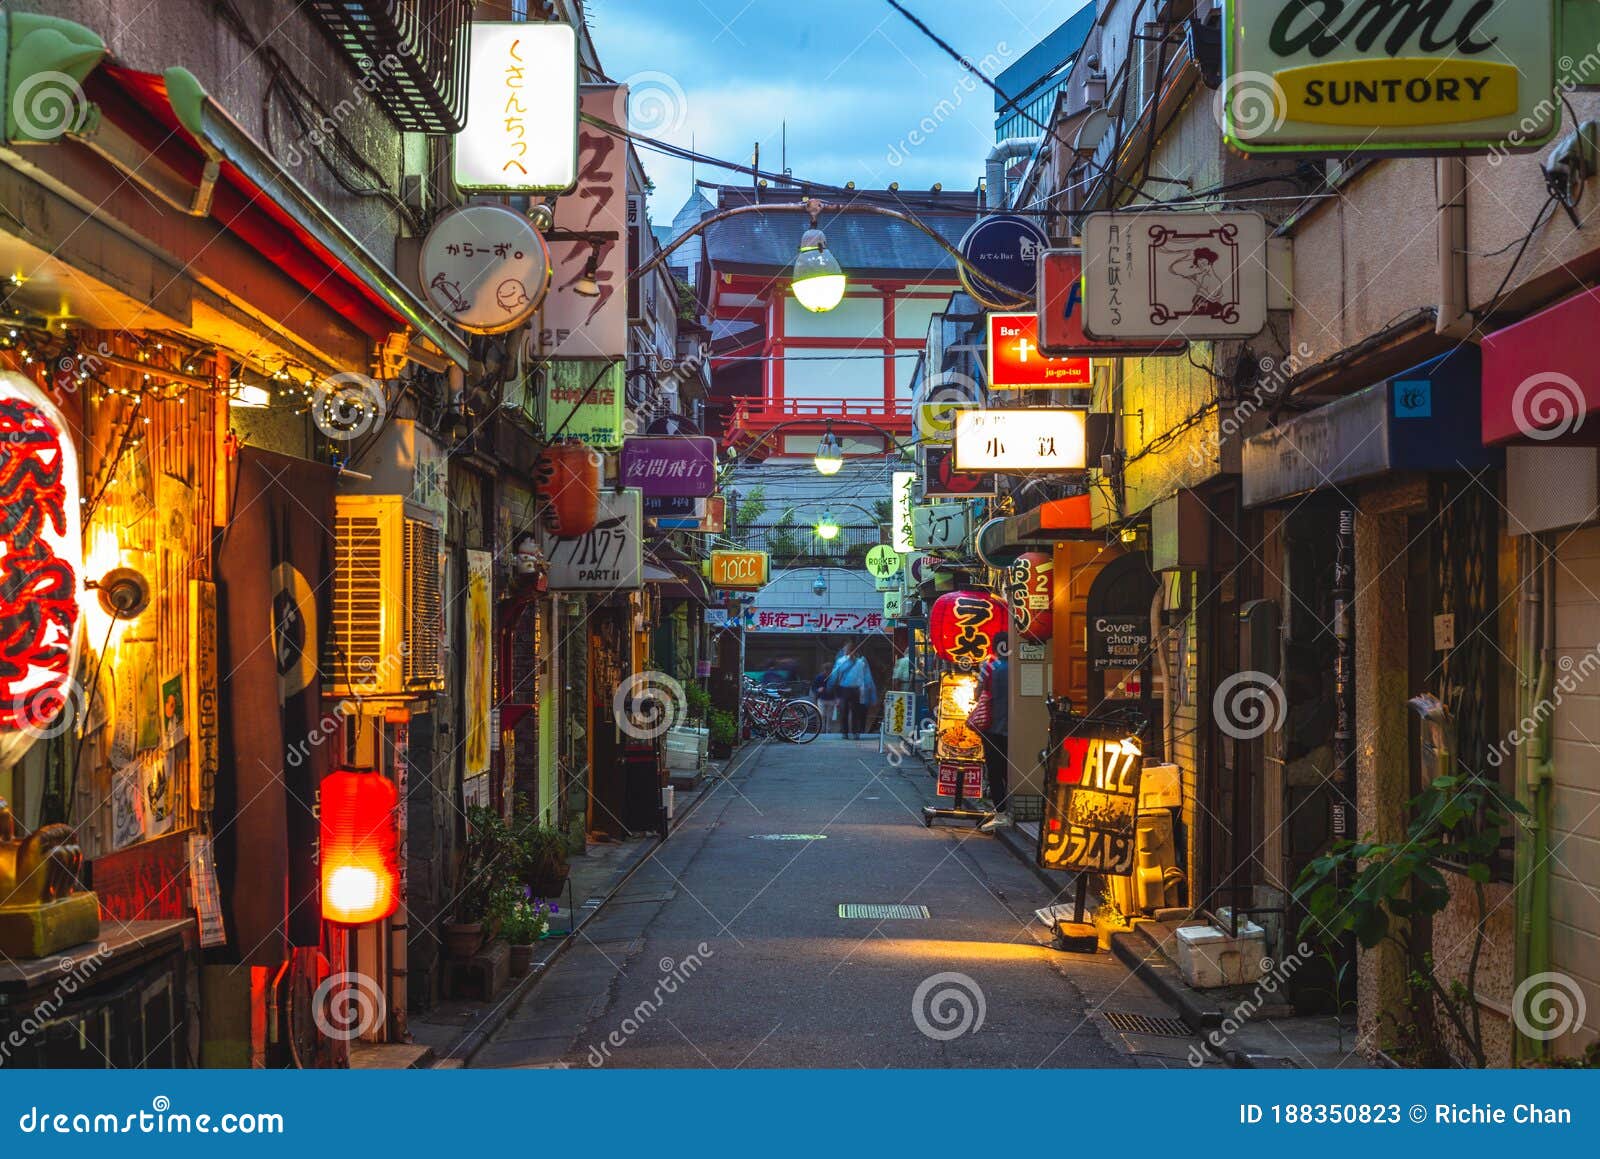 Club Alleyway Night Photos Free Royalty Free Stock Photos From Dreamstime